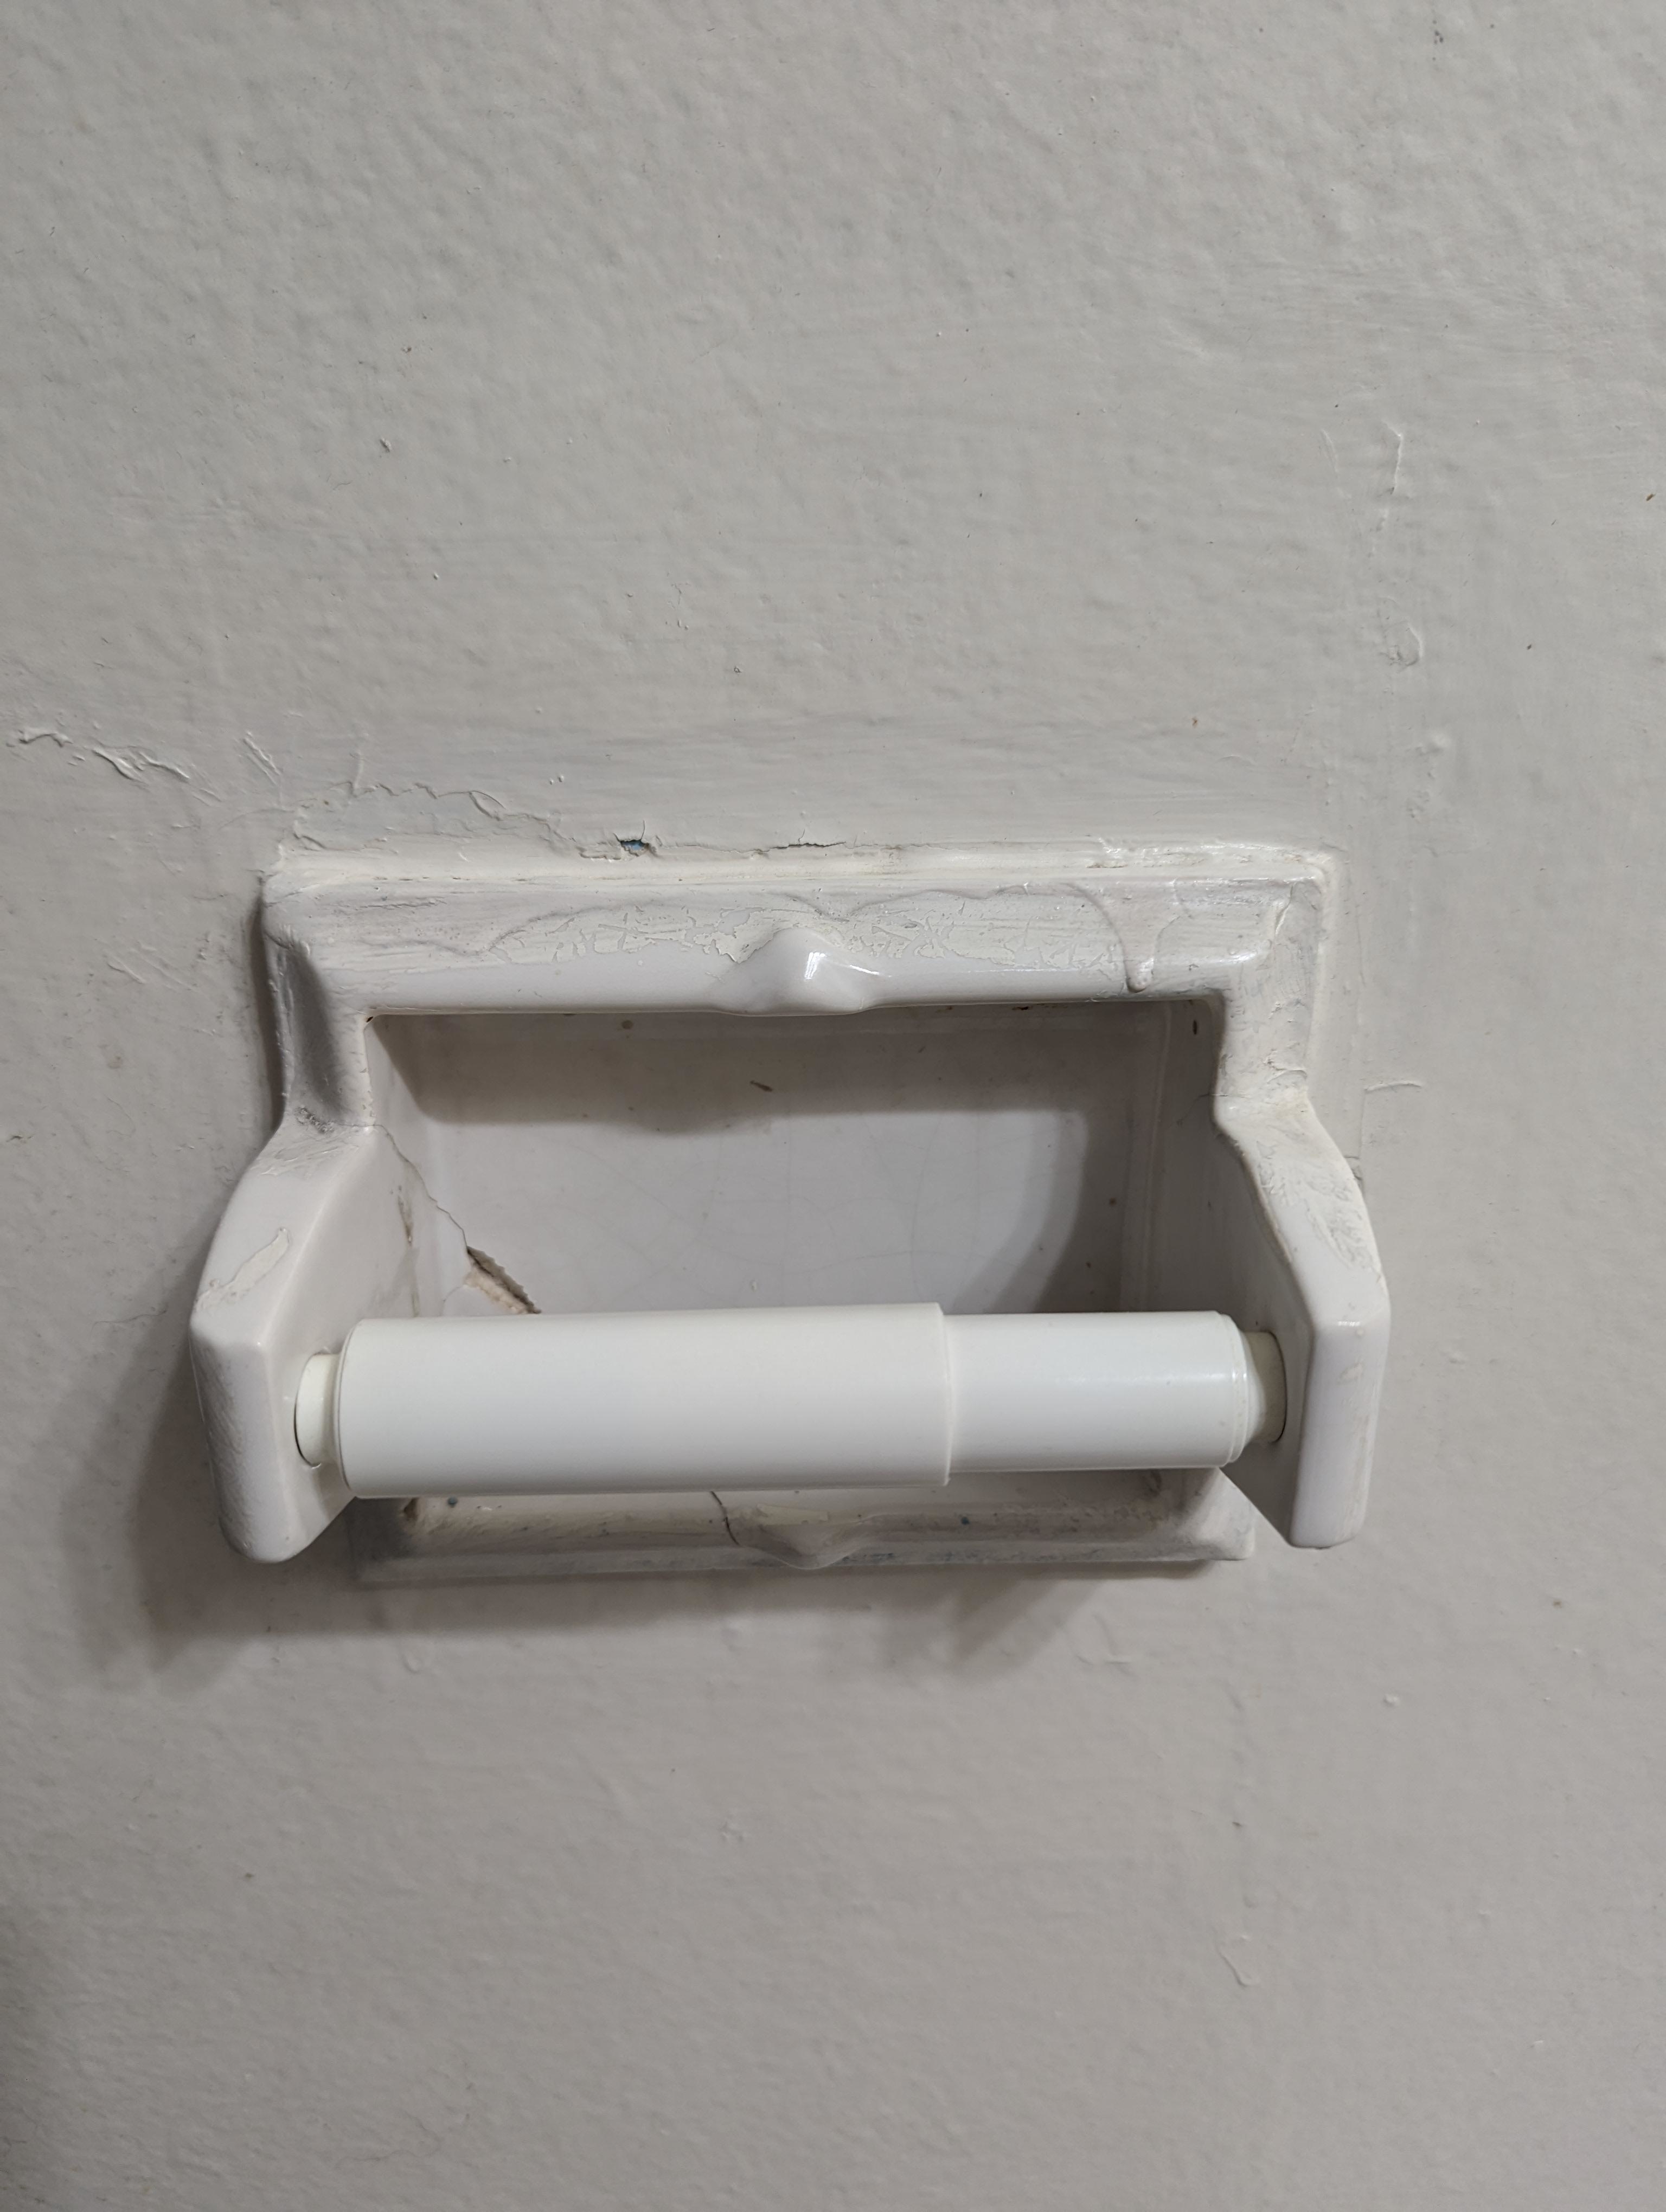 An empty toilet paper holder mounted on a wall